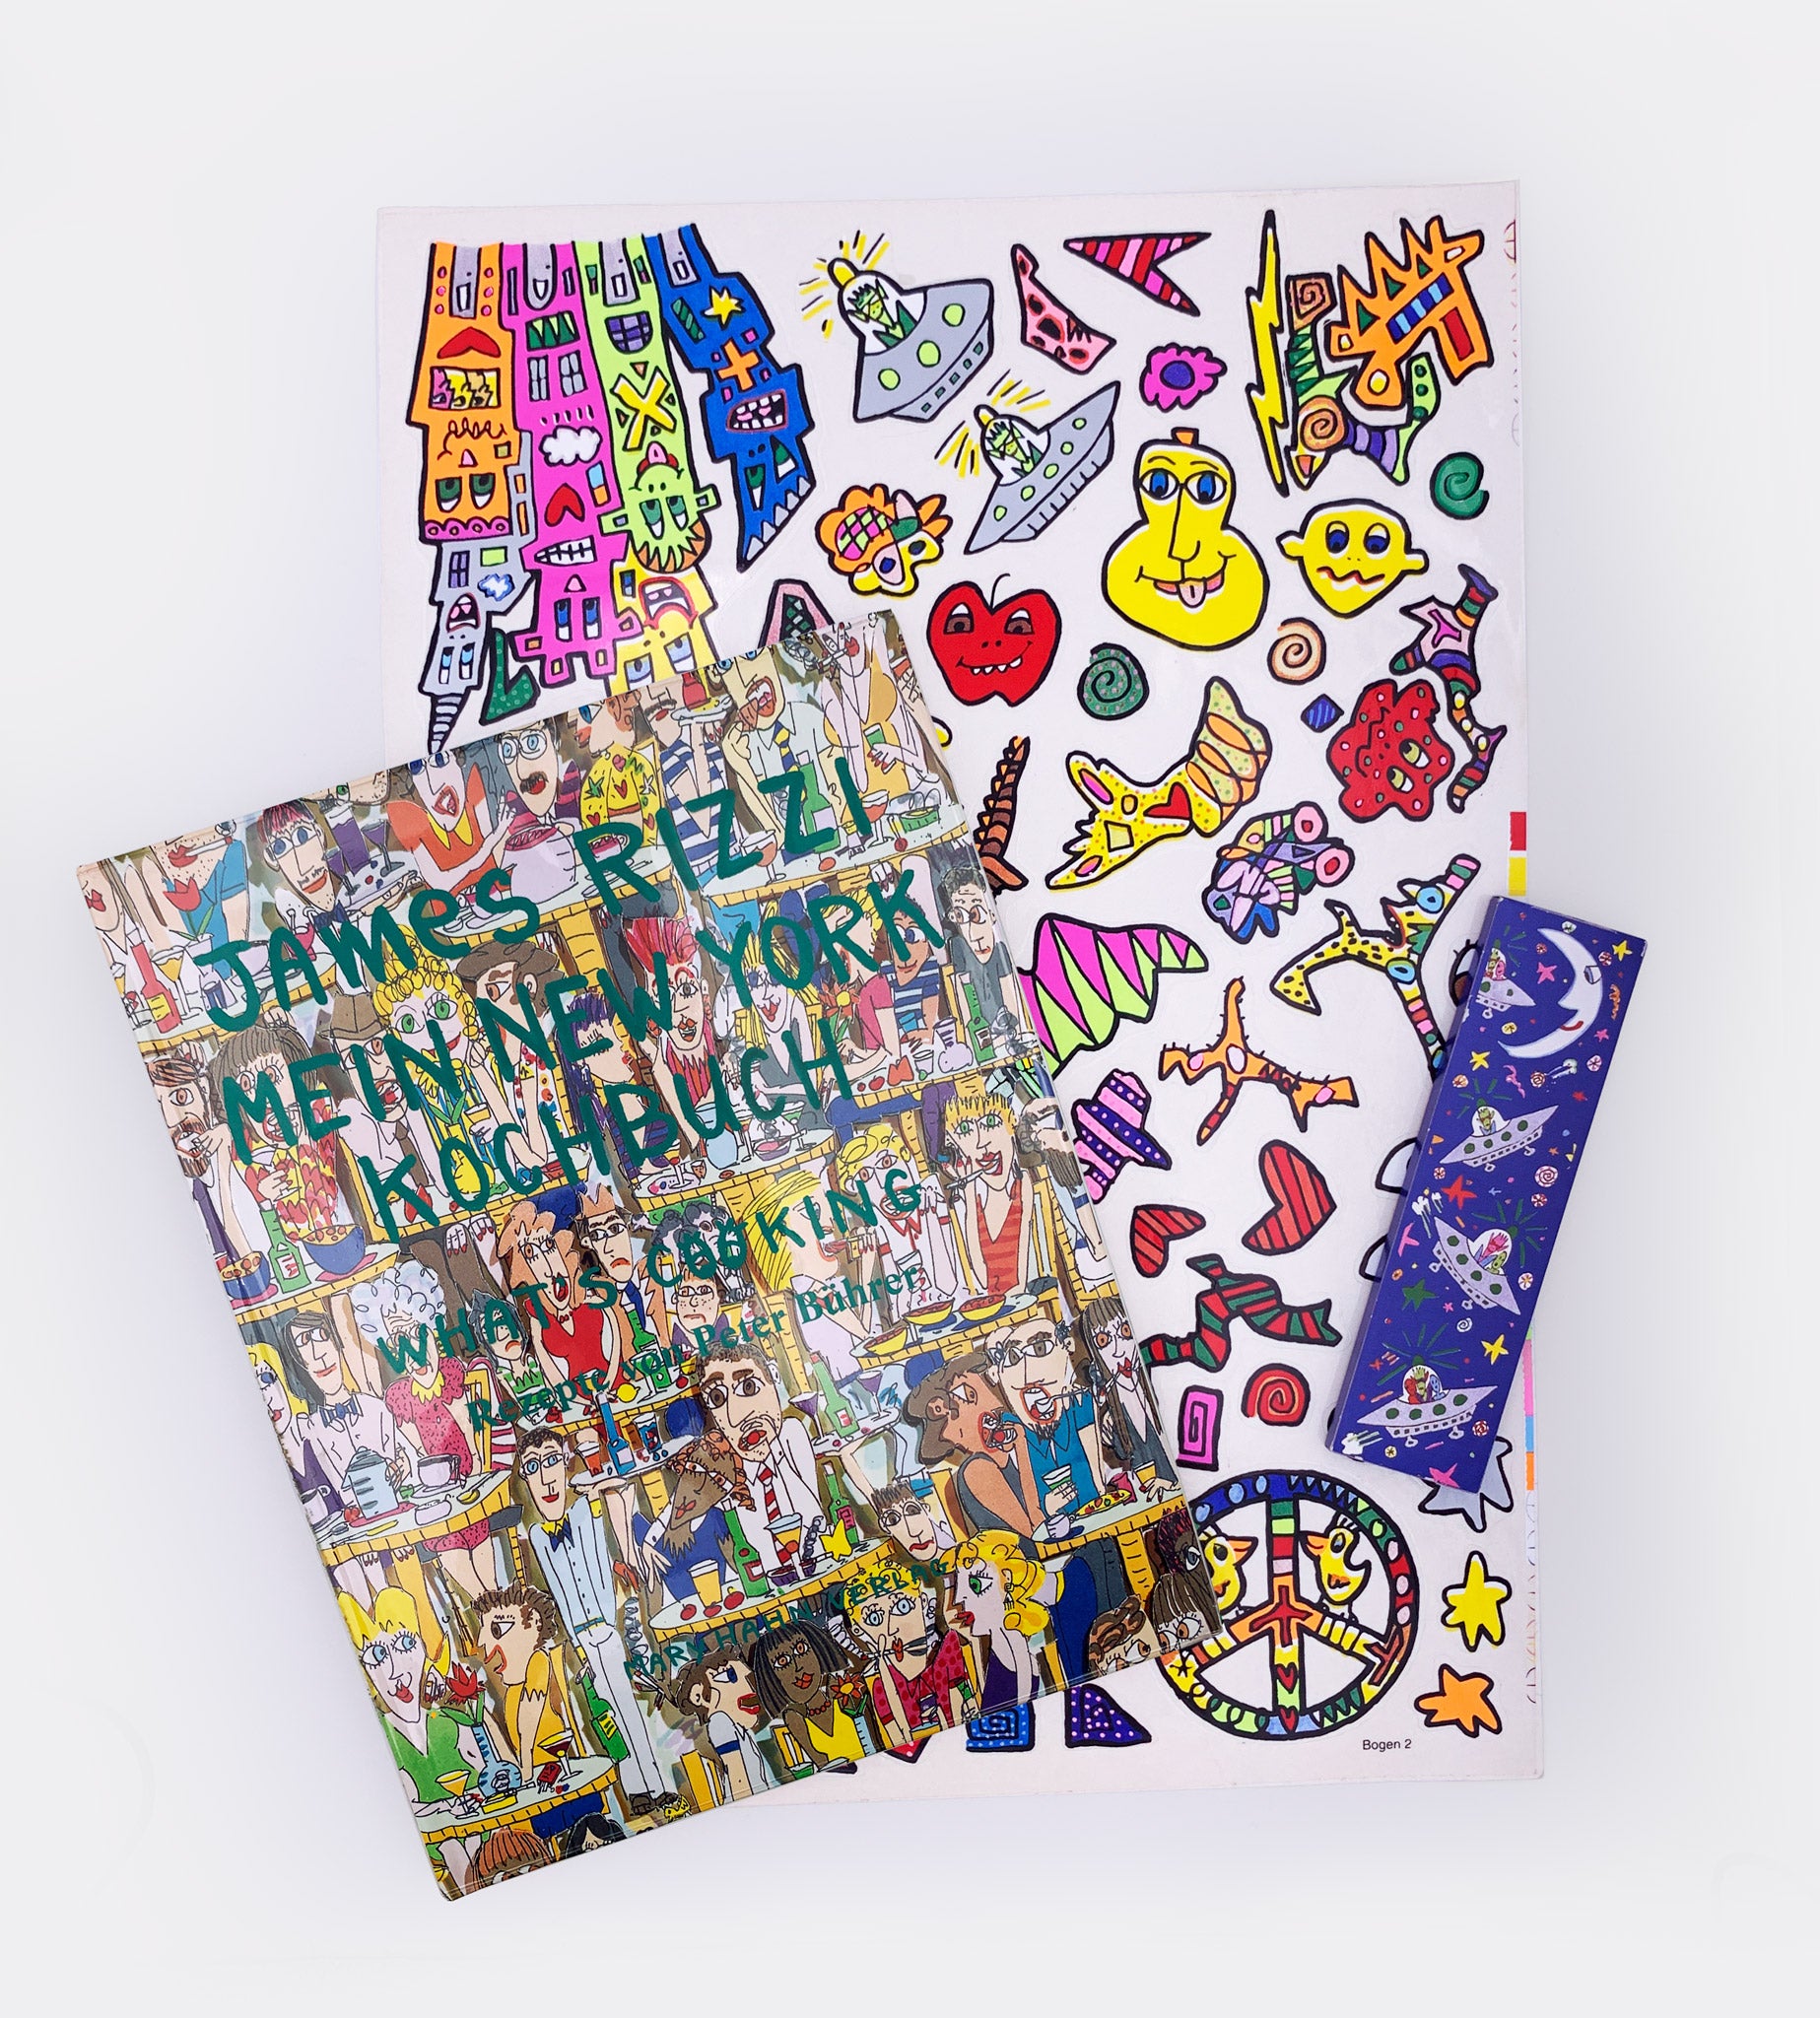 JAMES RIZZI | One-of-a-Kind | BE MAGICAL - Rizzi @ made by yourself - Artwork Set #4 | Flat-Print color lithography & Mein New York Kochbuch